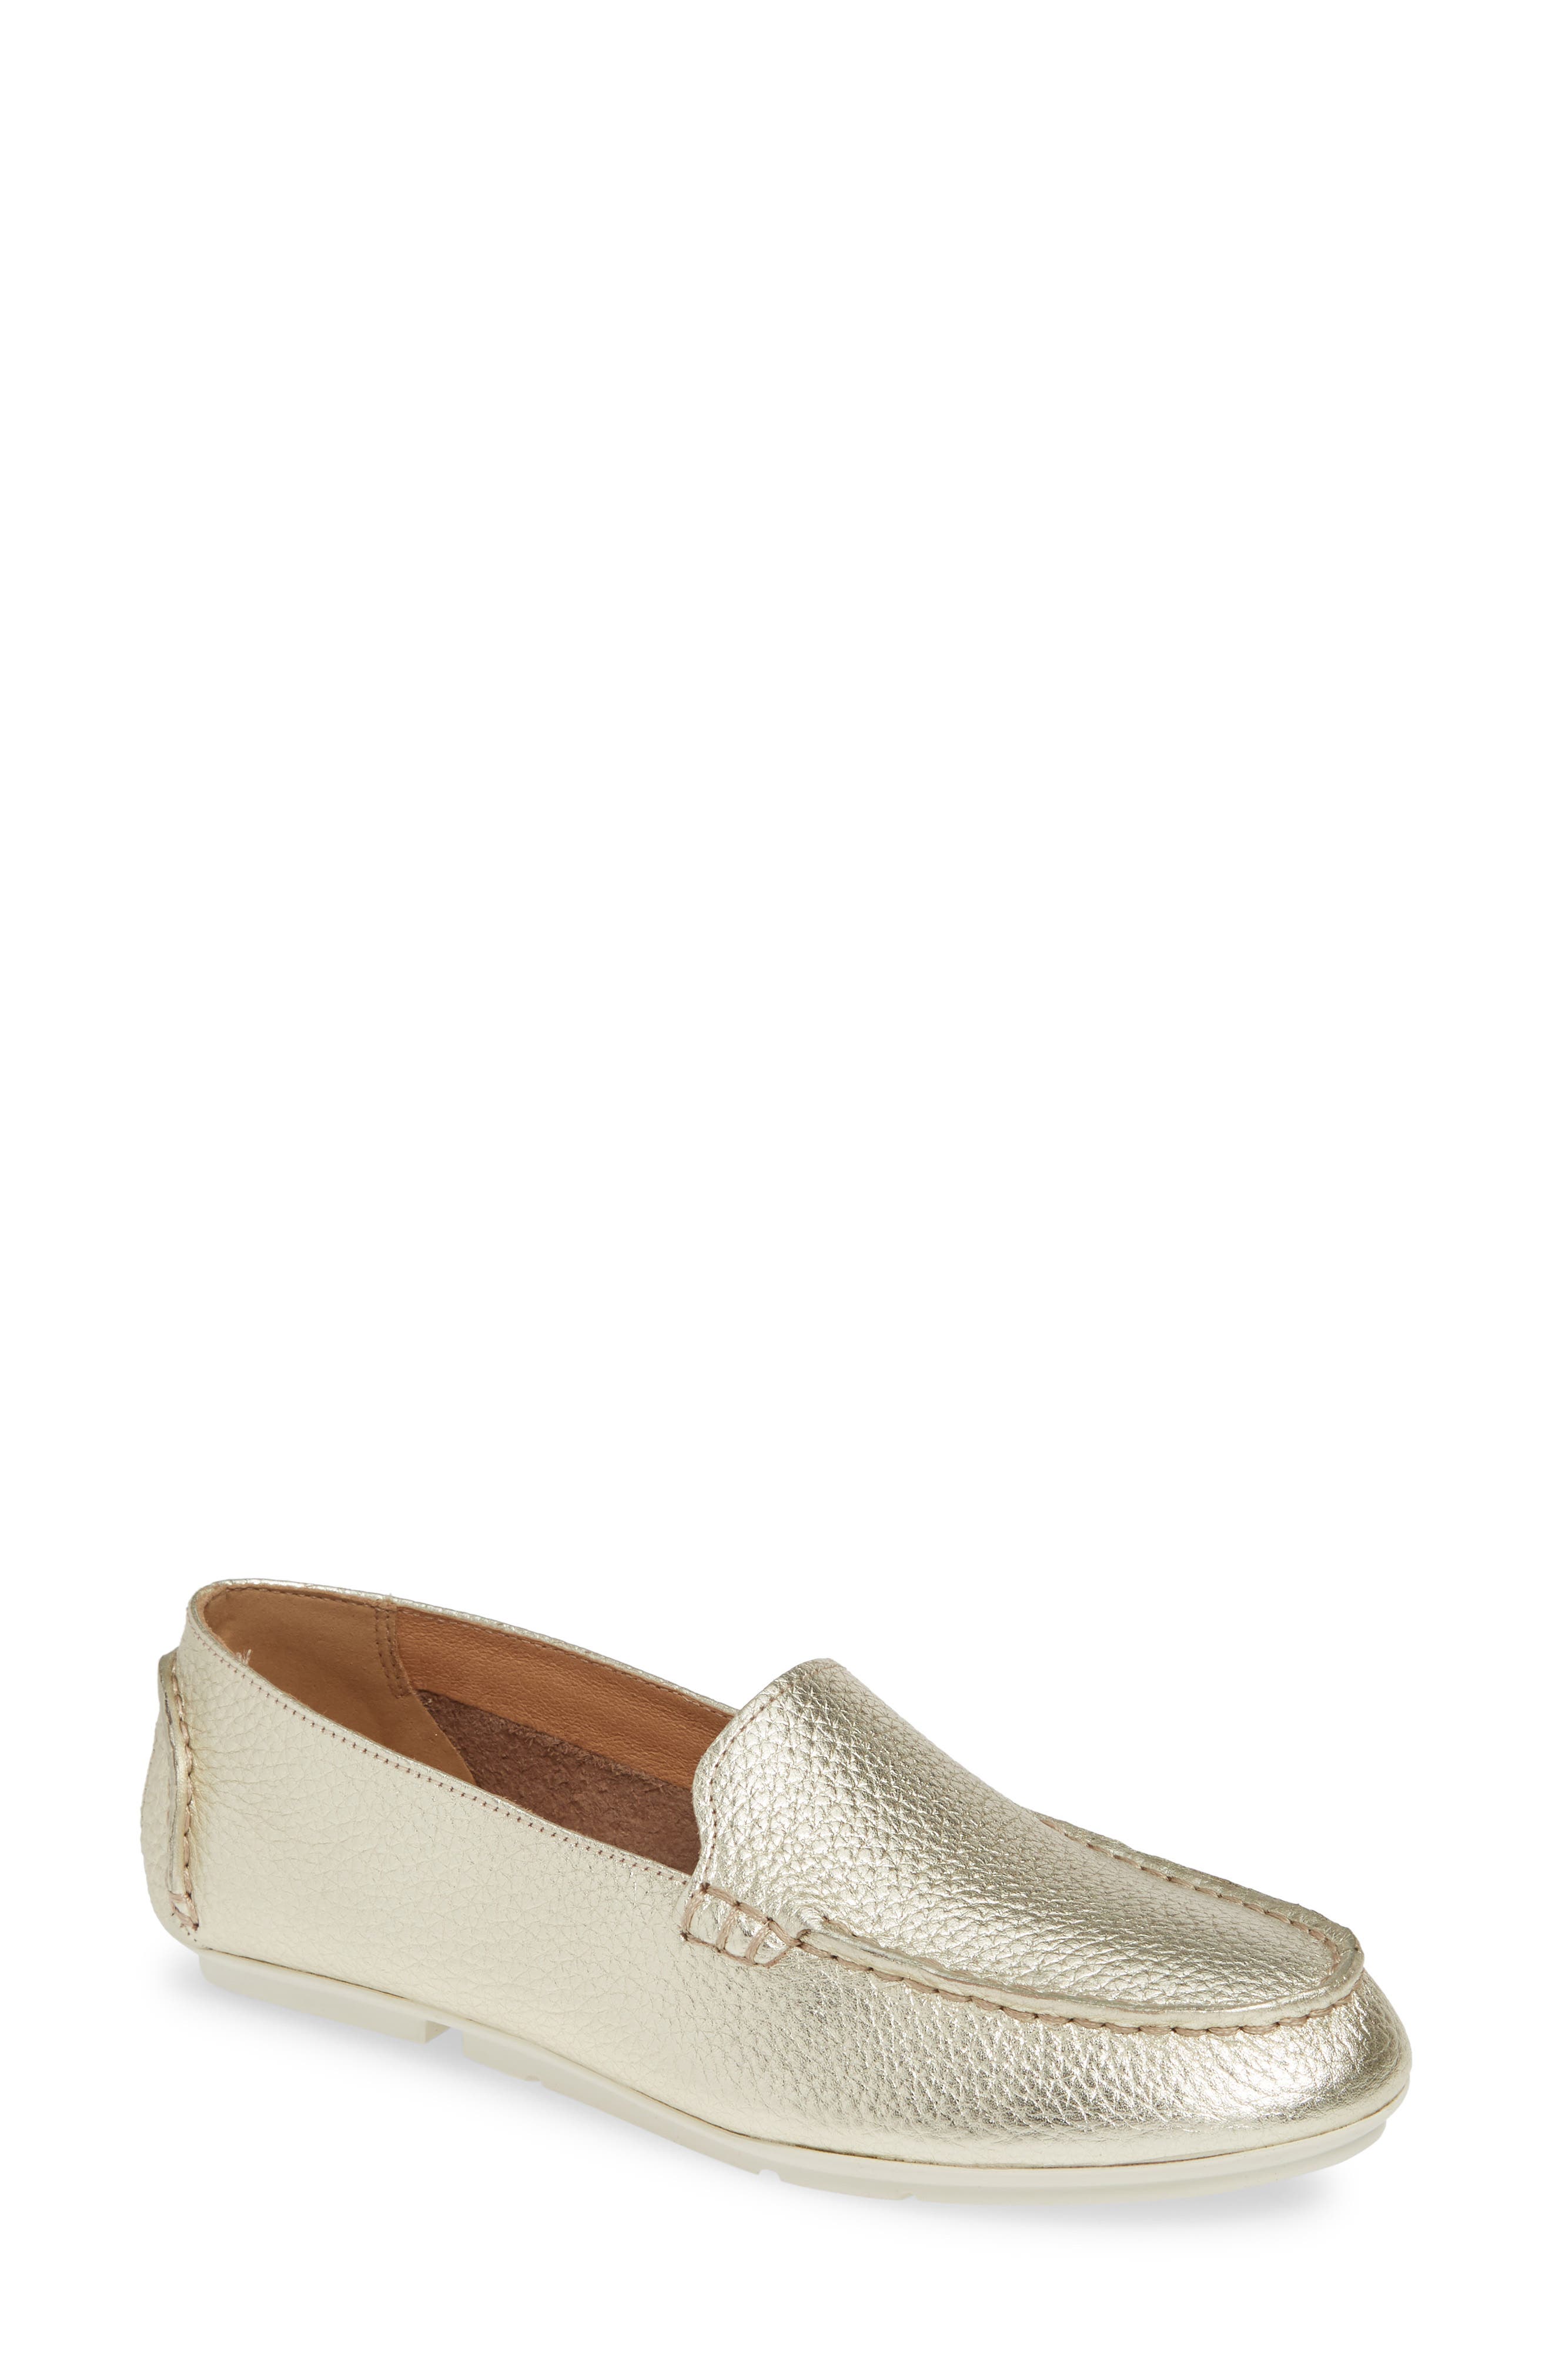 sperry top sider loafers